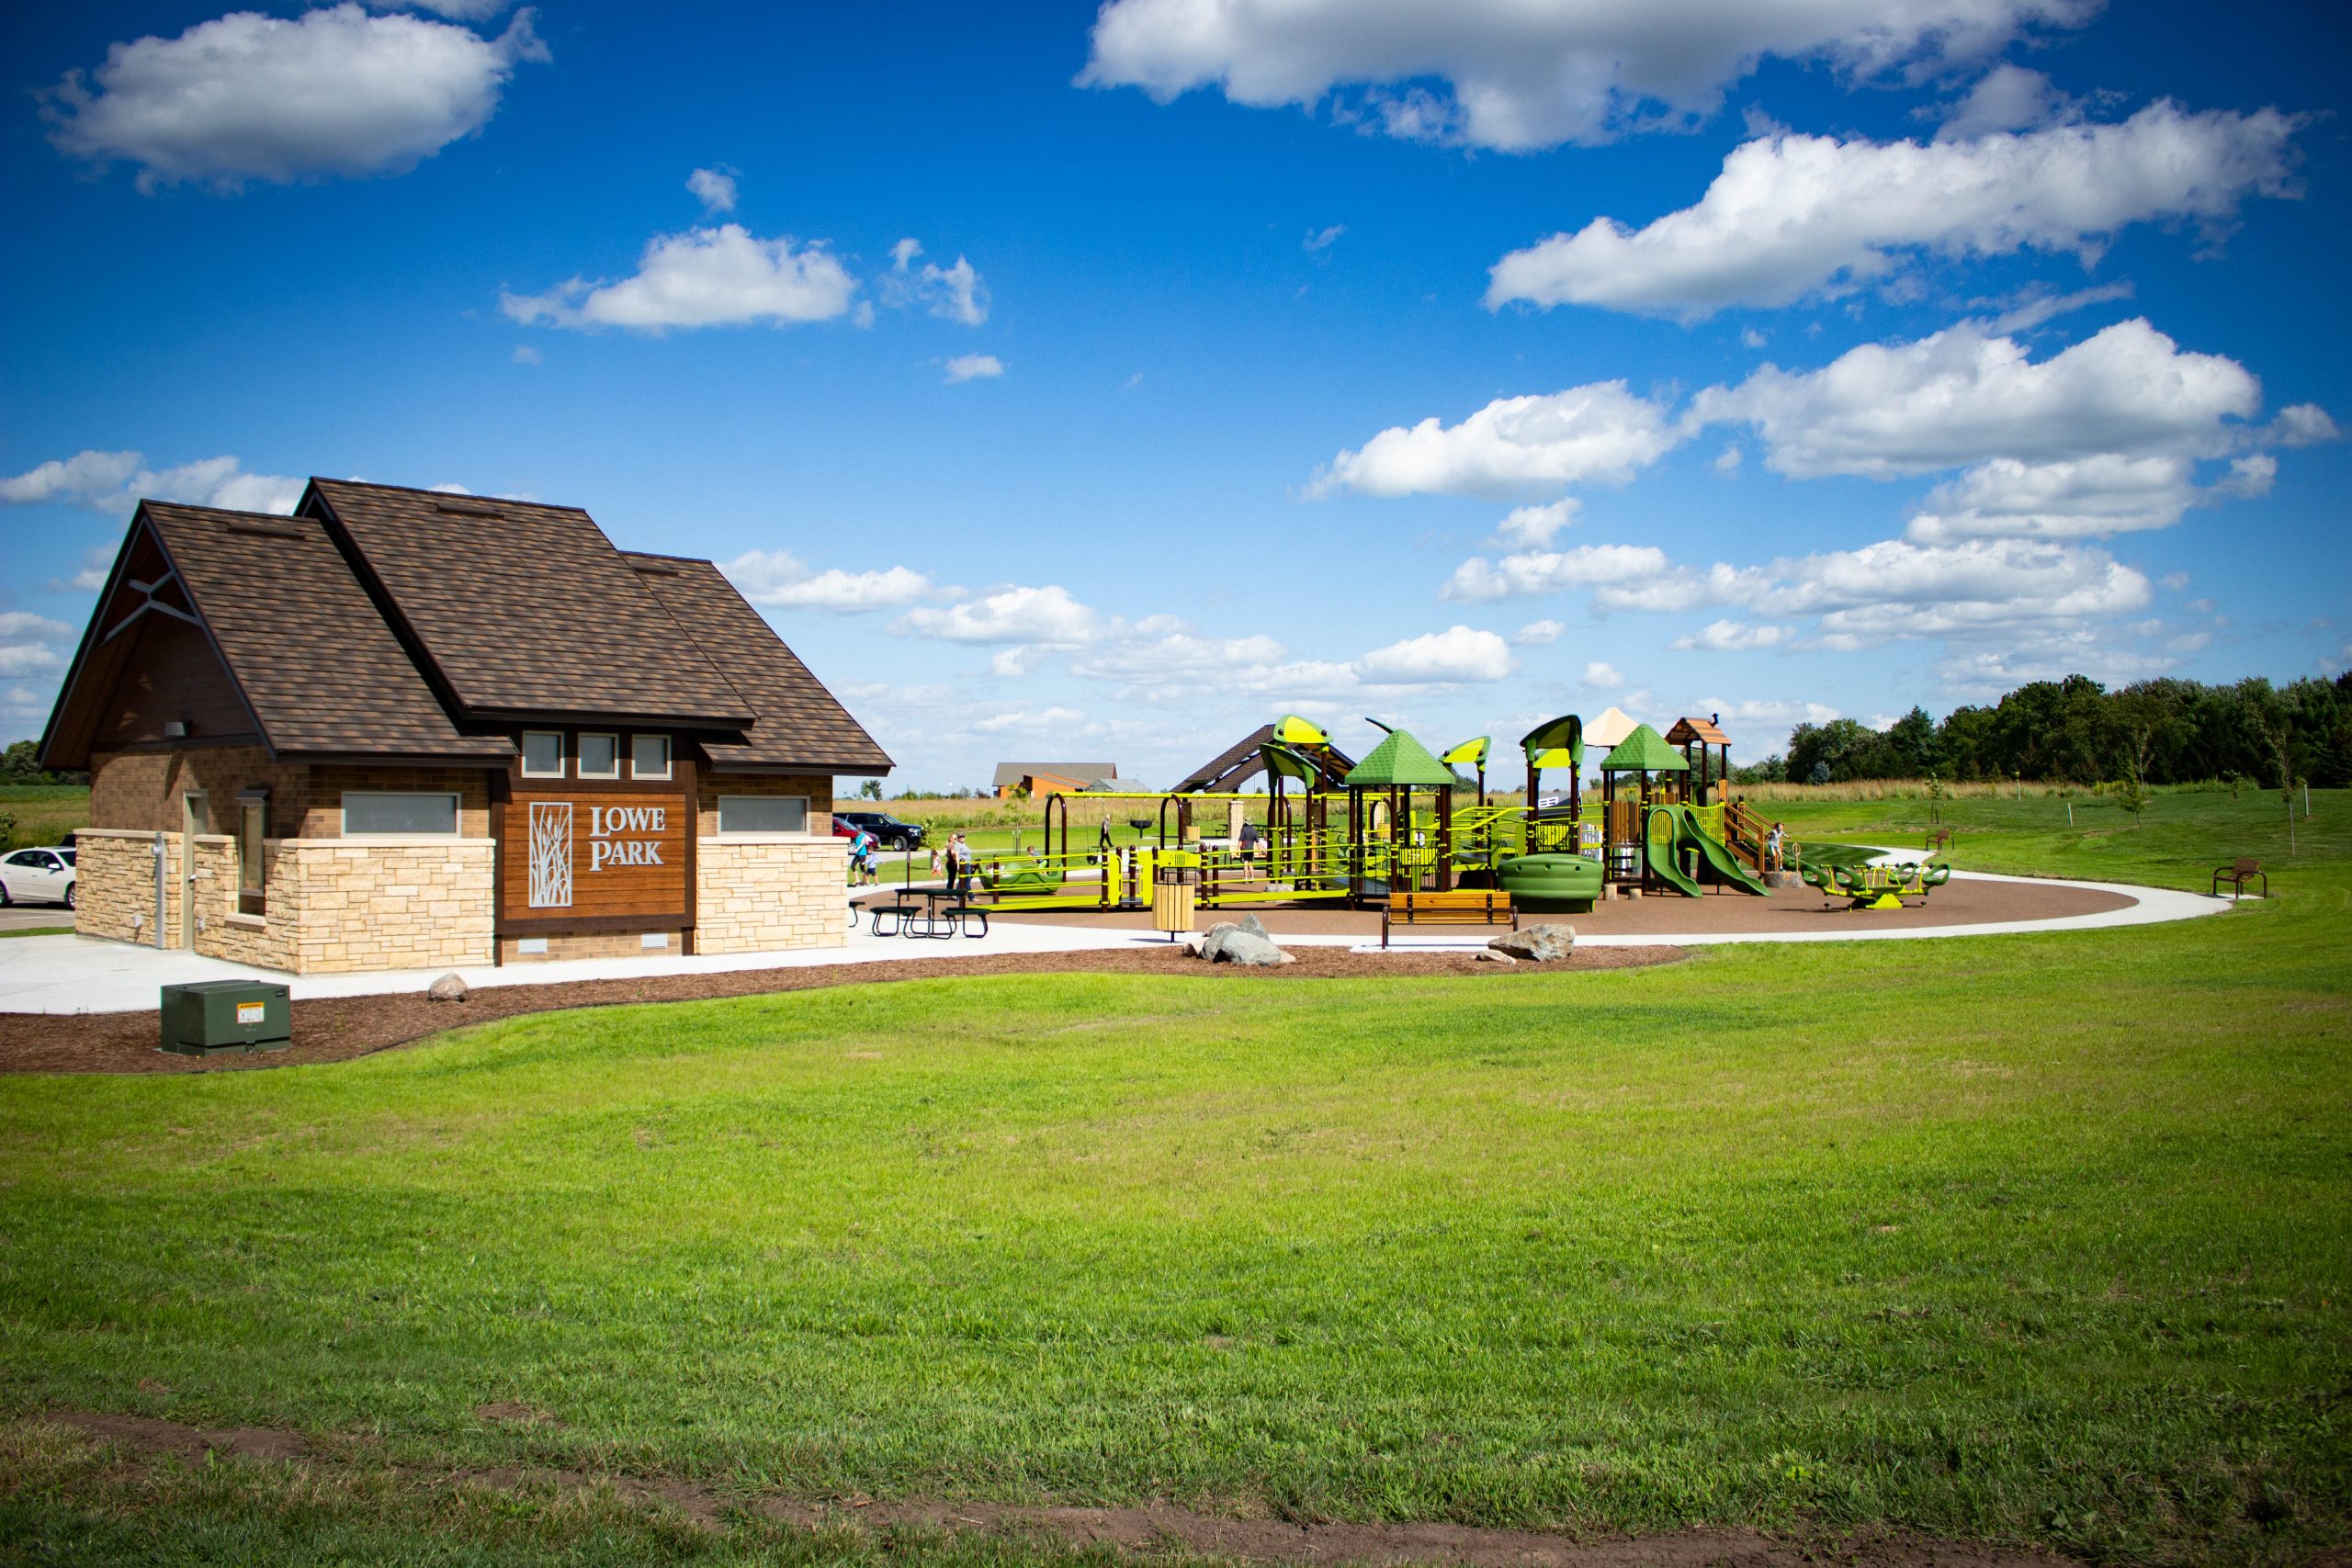 Lowe Park in Marion Iowa provides fun for all ages and abilities